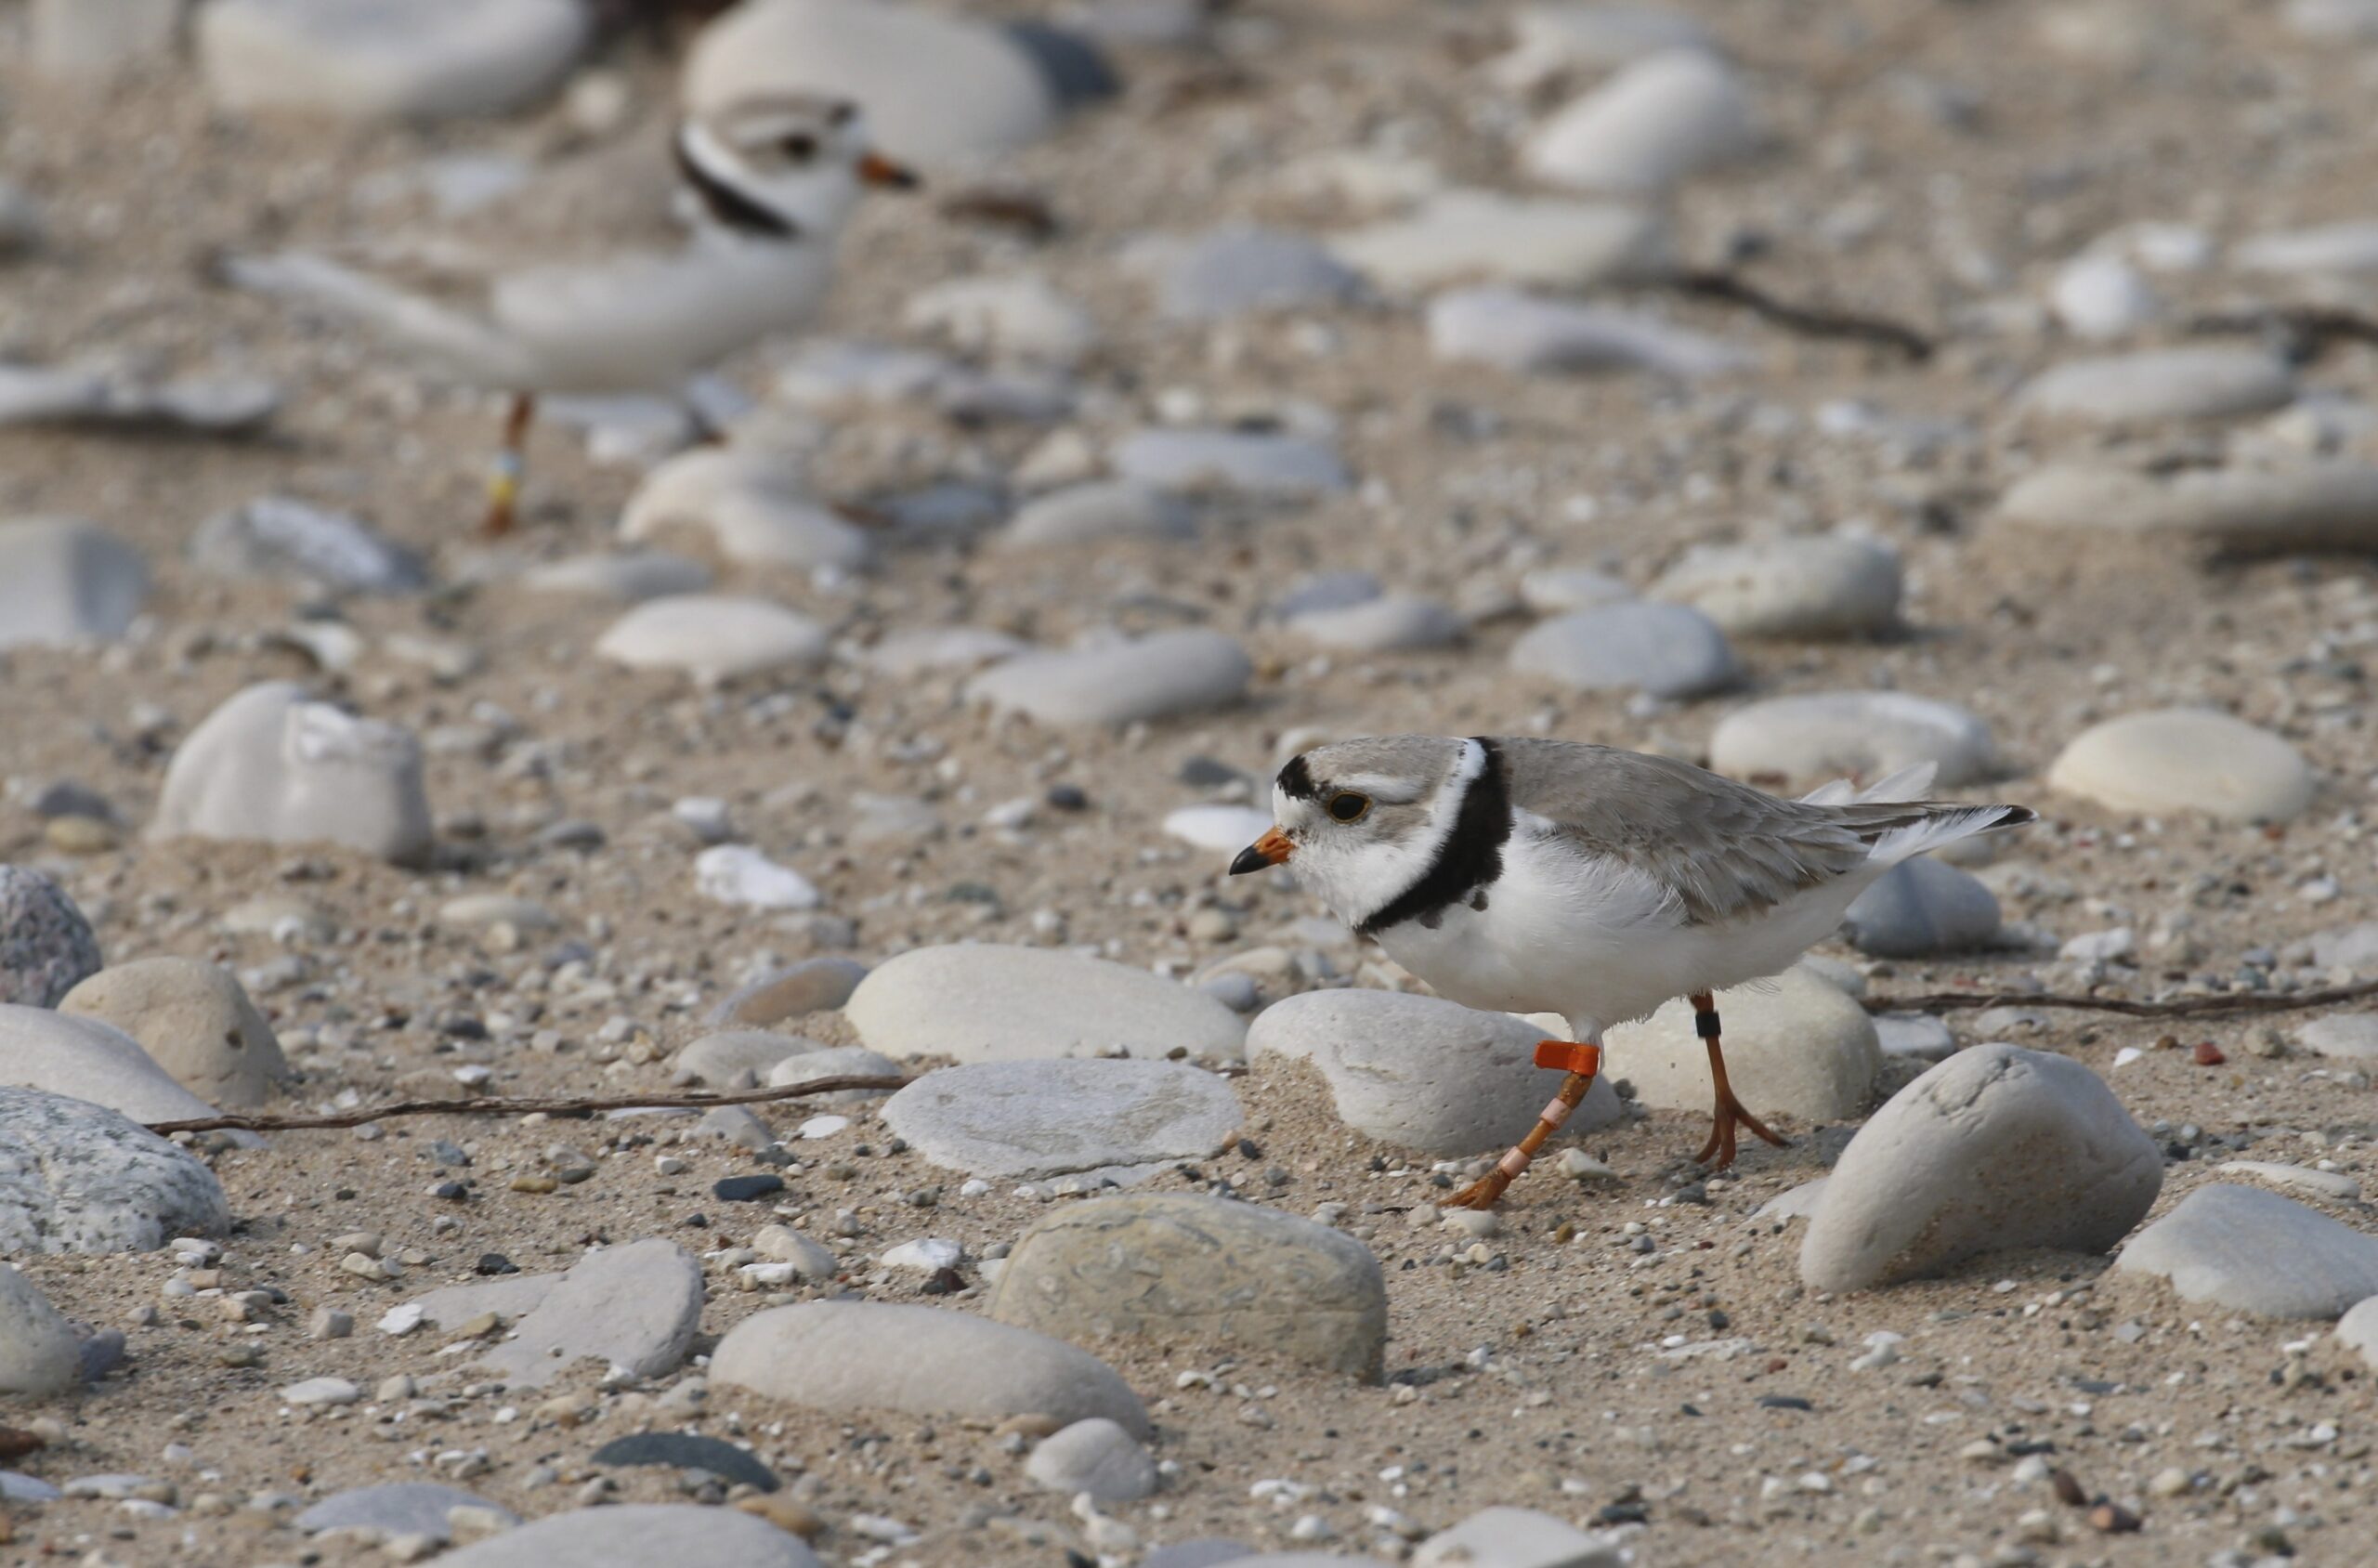 A piping plover walks on the sand in Glen Haven, Mich.